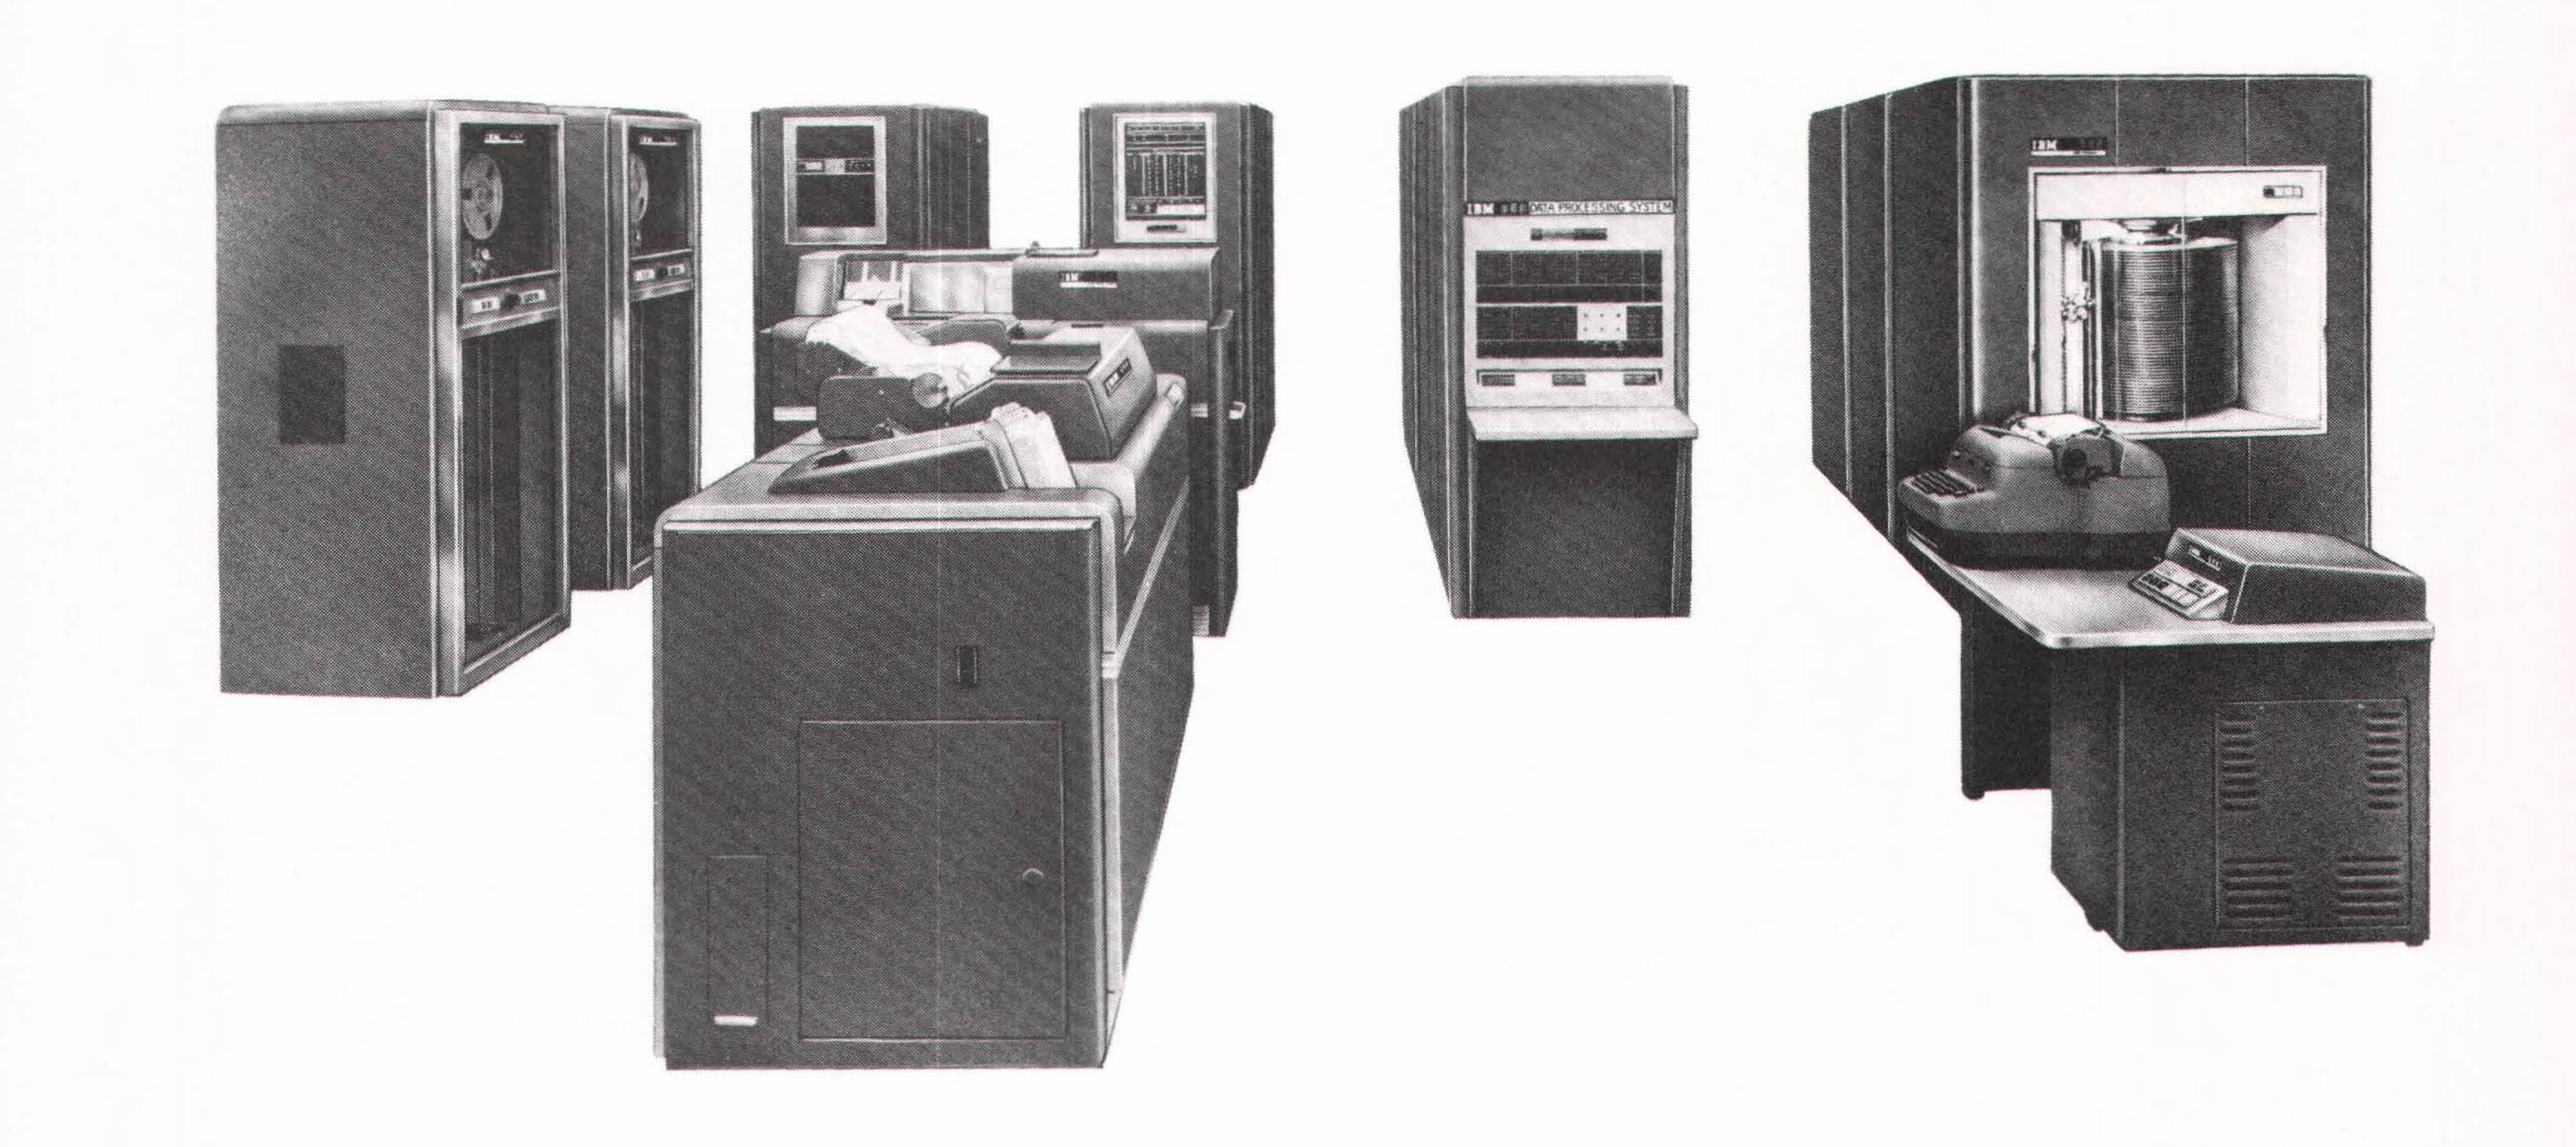 Computers in the mid-60s (IBM 650)